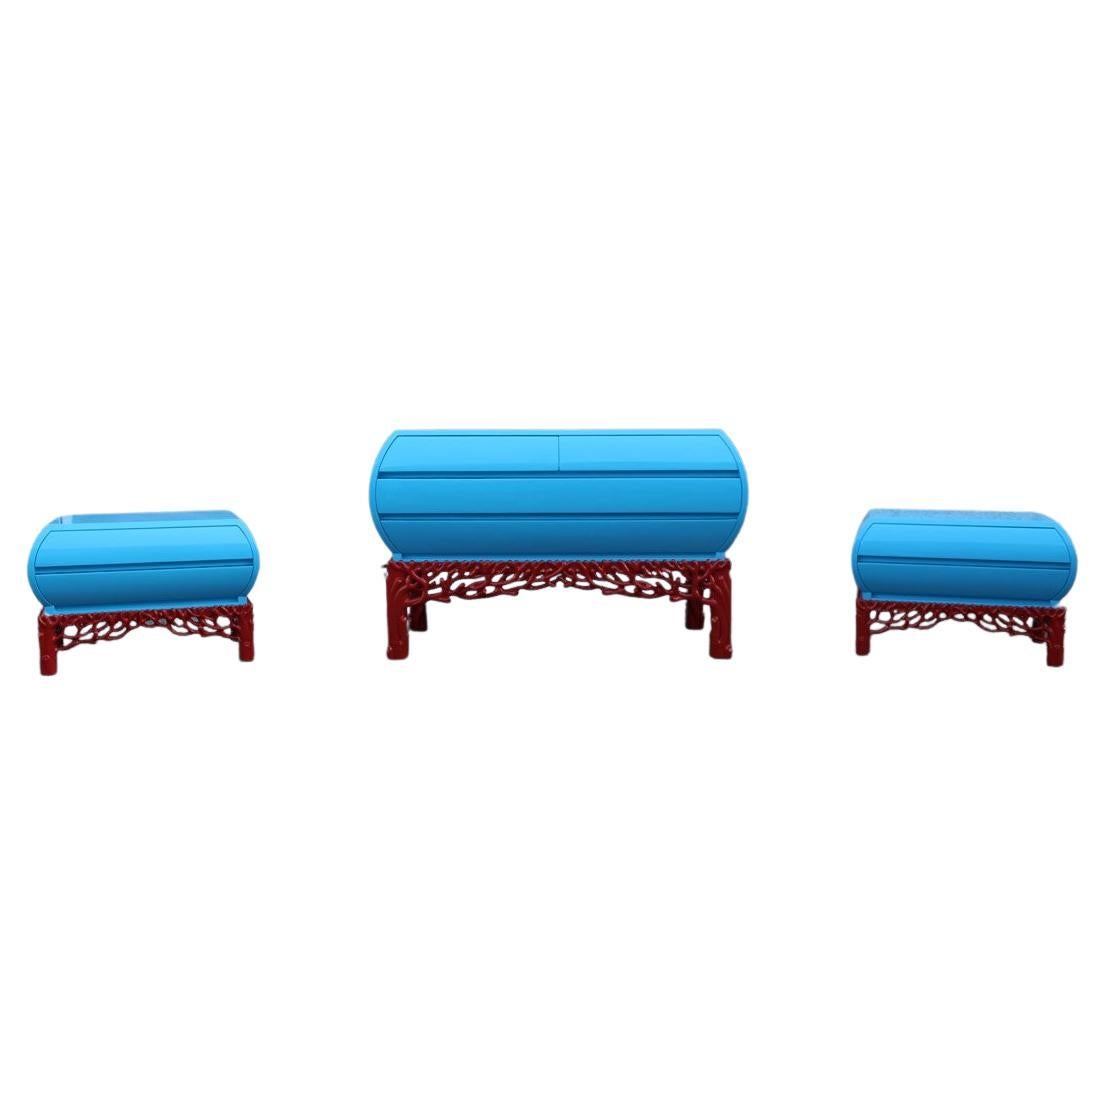 Decotarive Bedroom Sets Arpex Roma 1970 in sea Blue and Red Coral Made in Italy For Sale